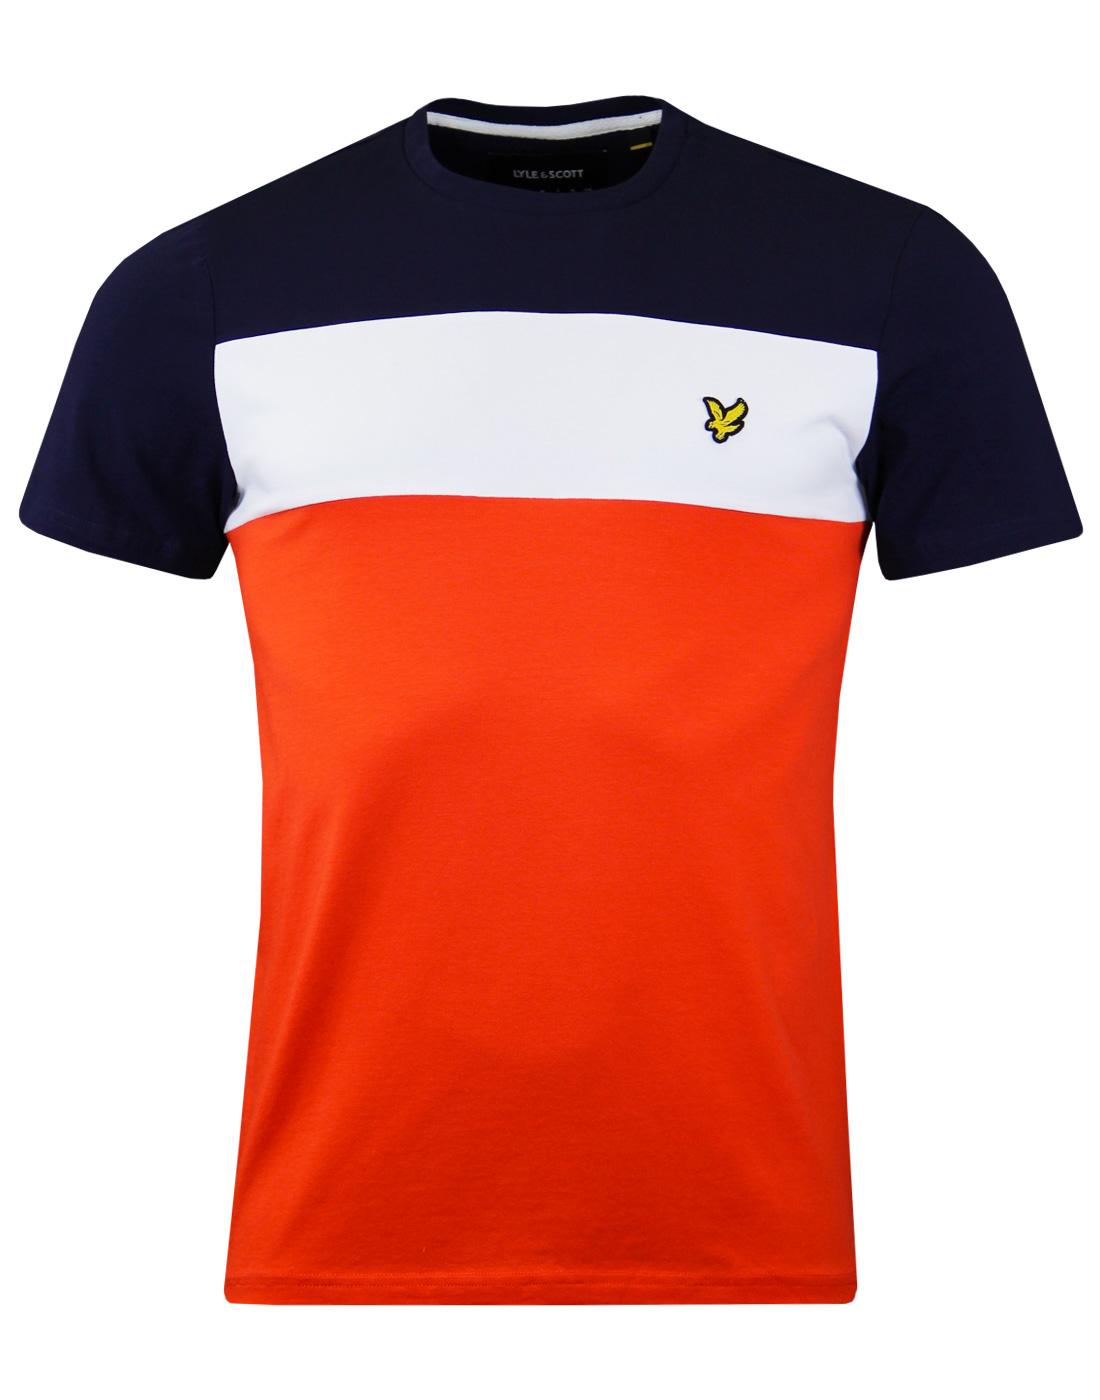 red lyle and scott t shirt